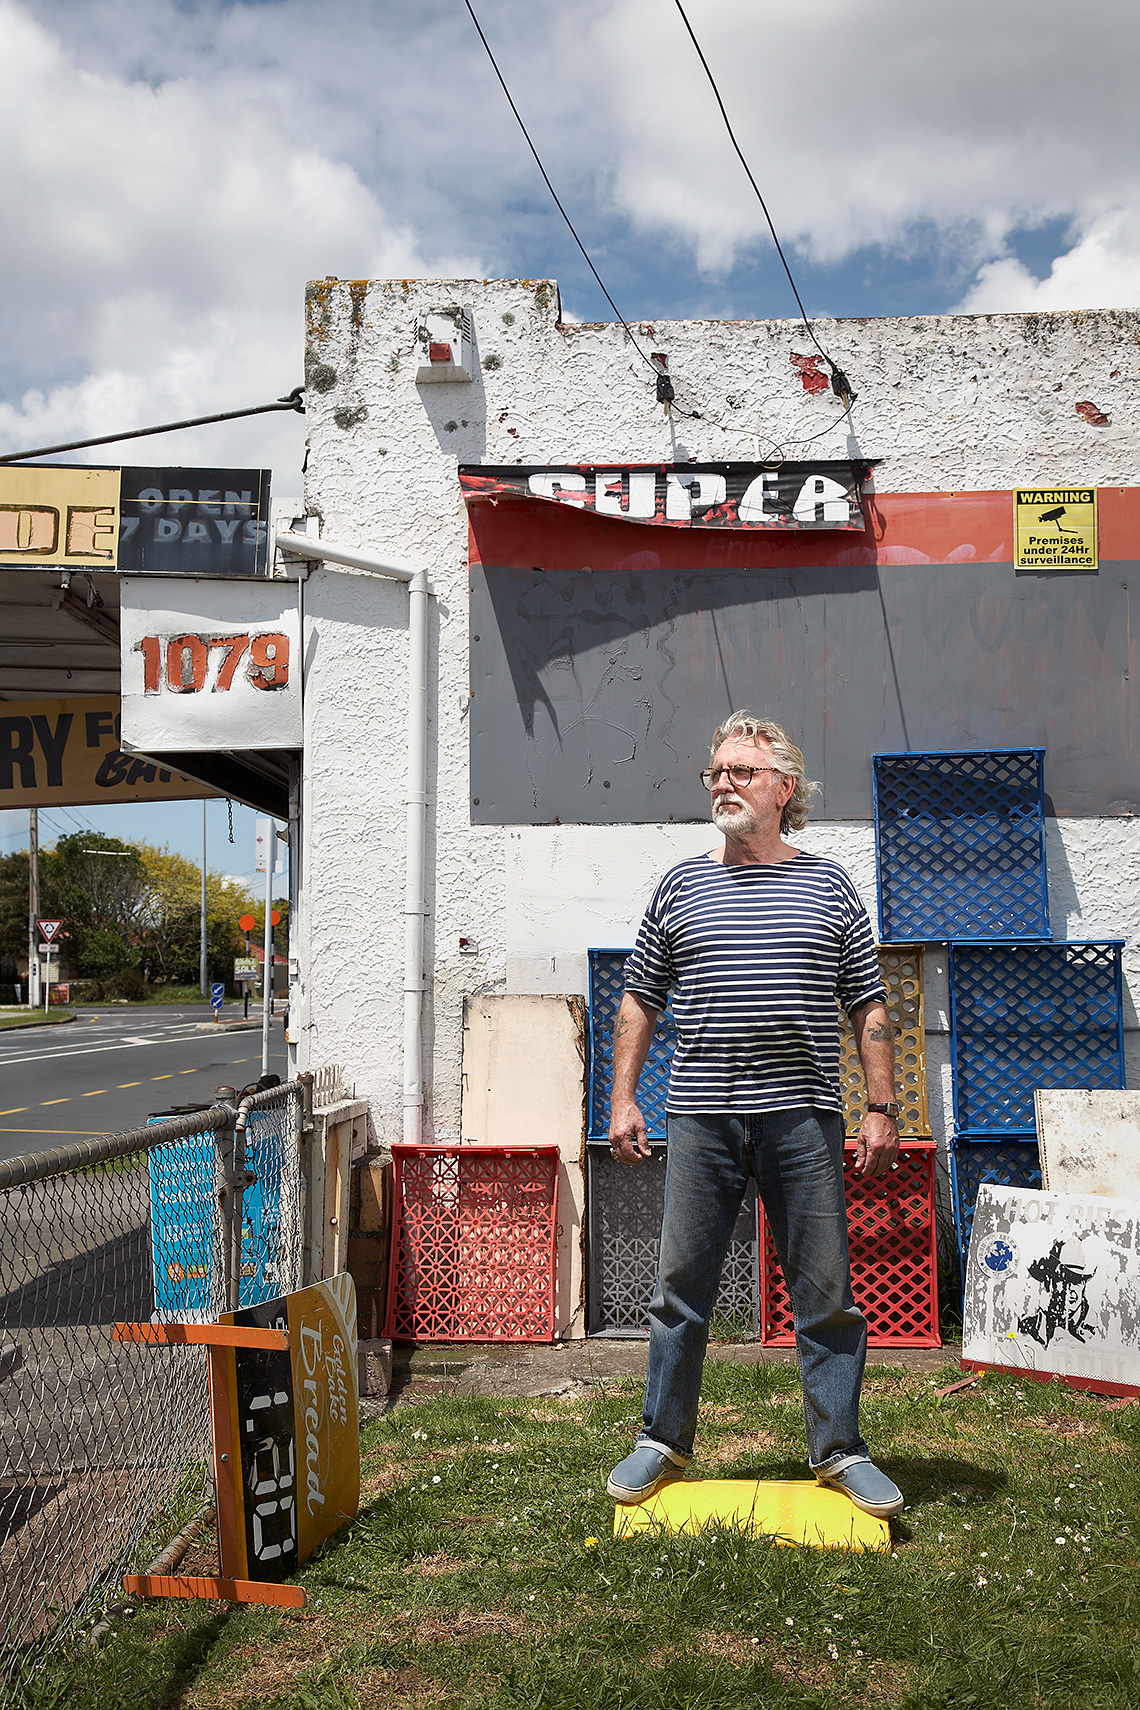 Artist Dick Frizzell and dairy signage, New Zealand